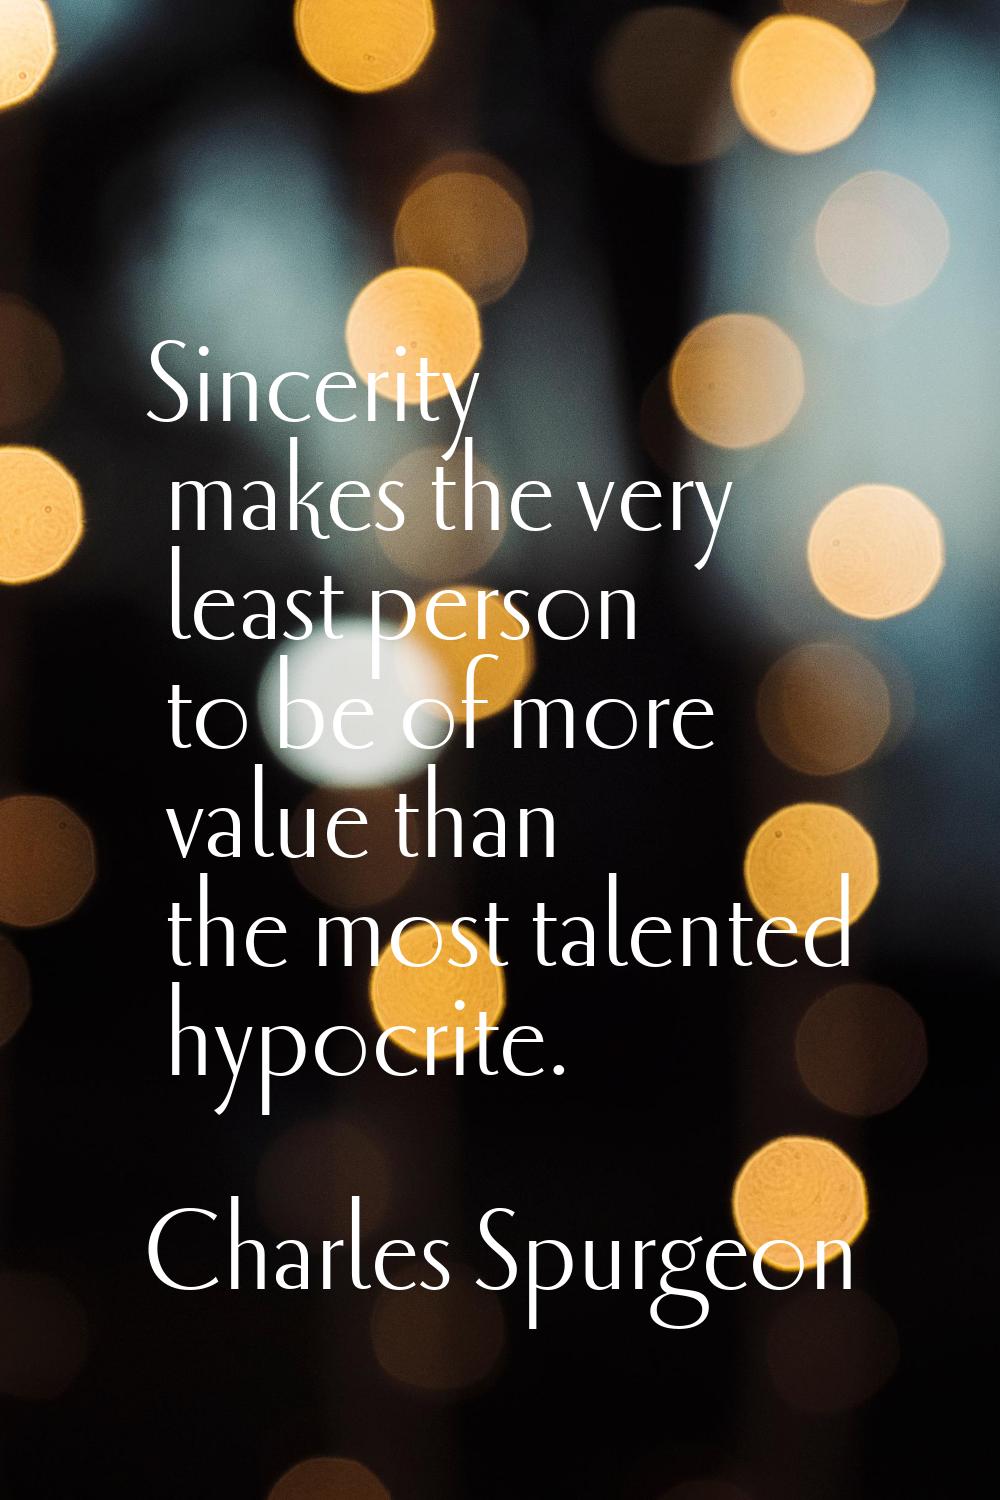 Sincerity makes the very least person to be of more value than the most talented hypocrite.